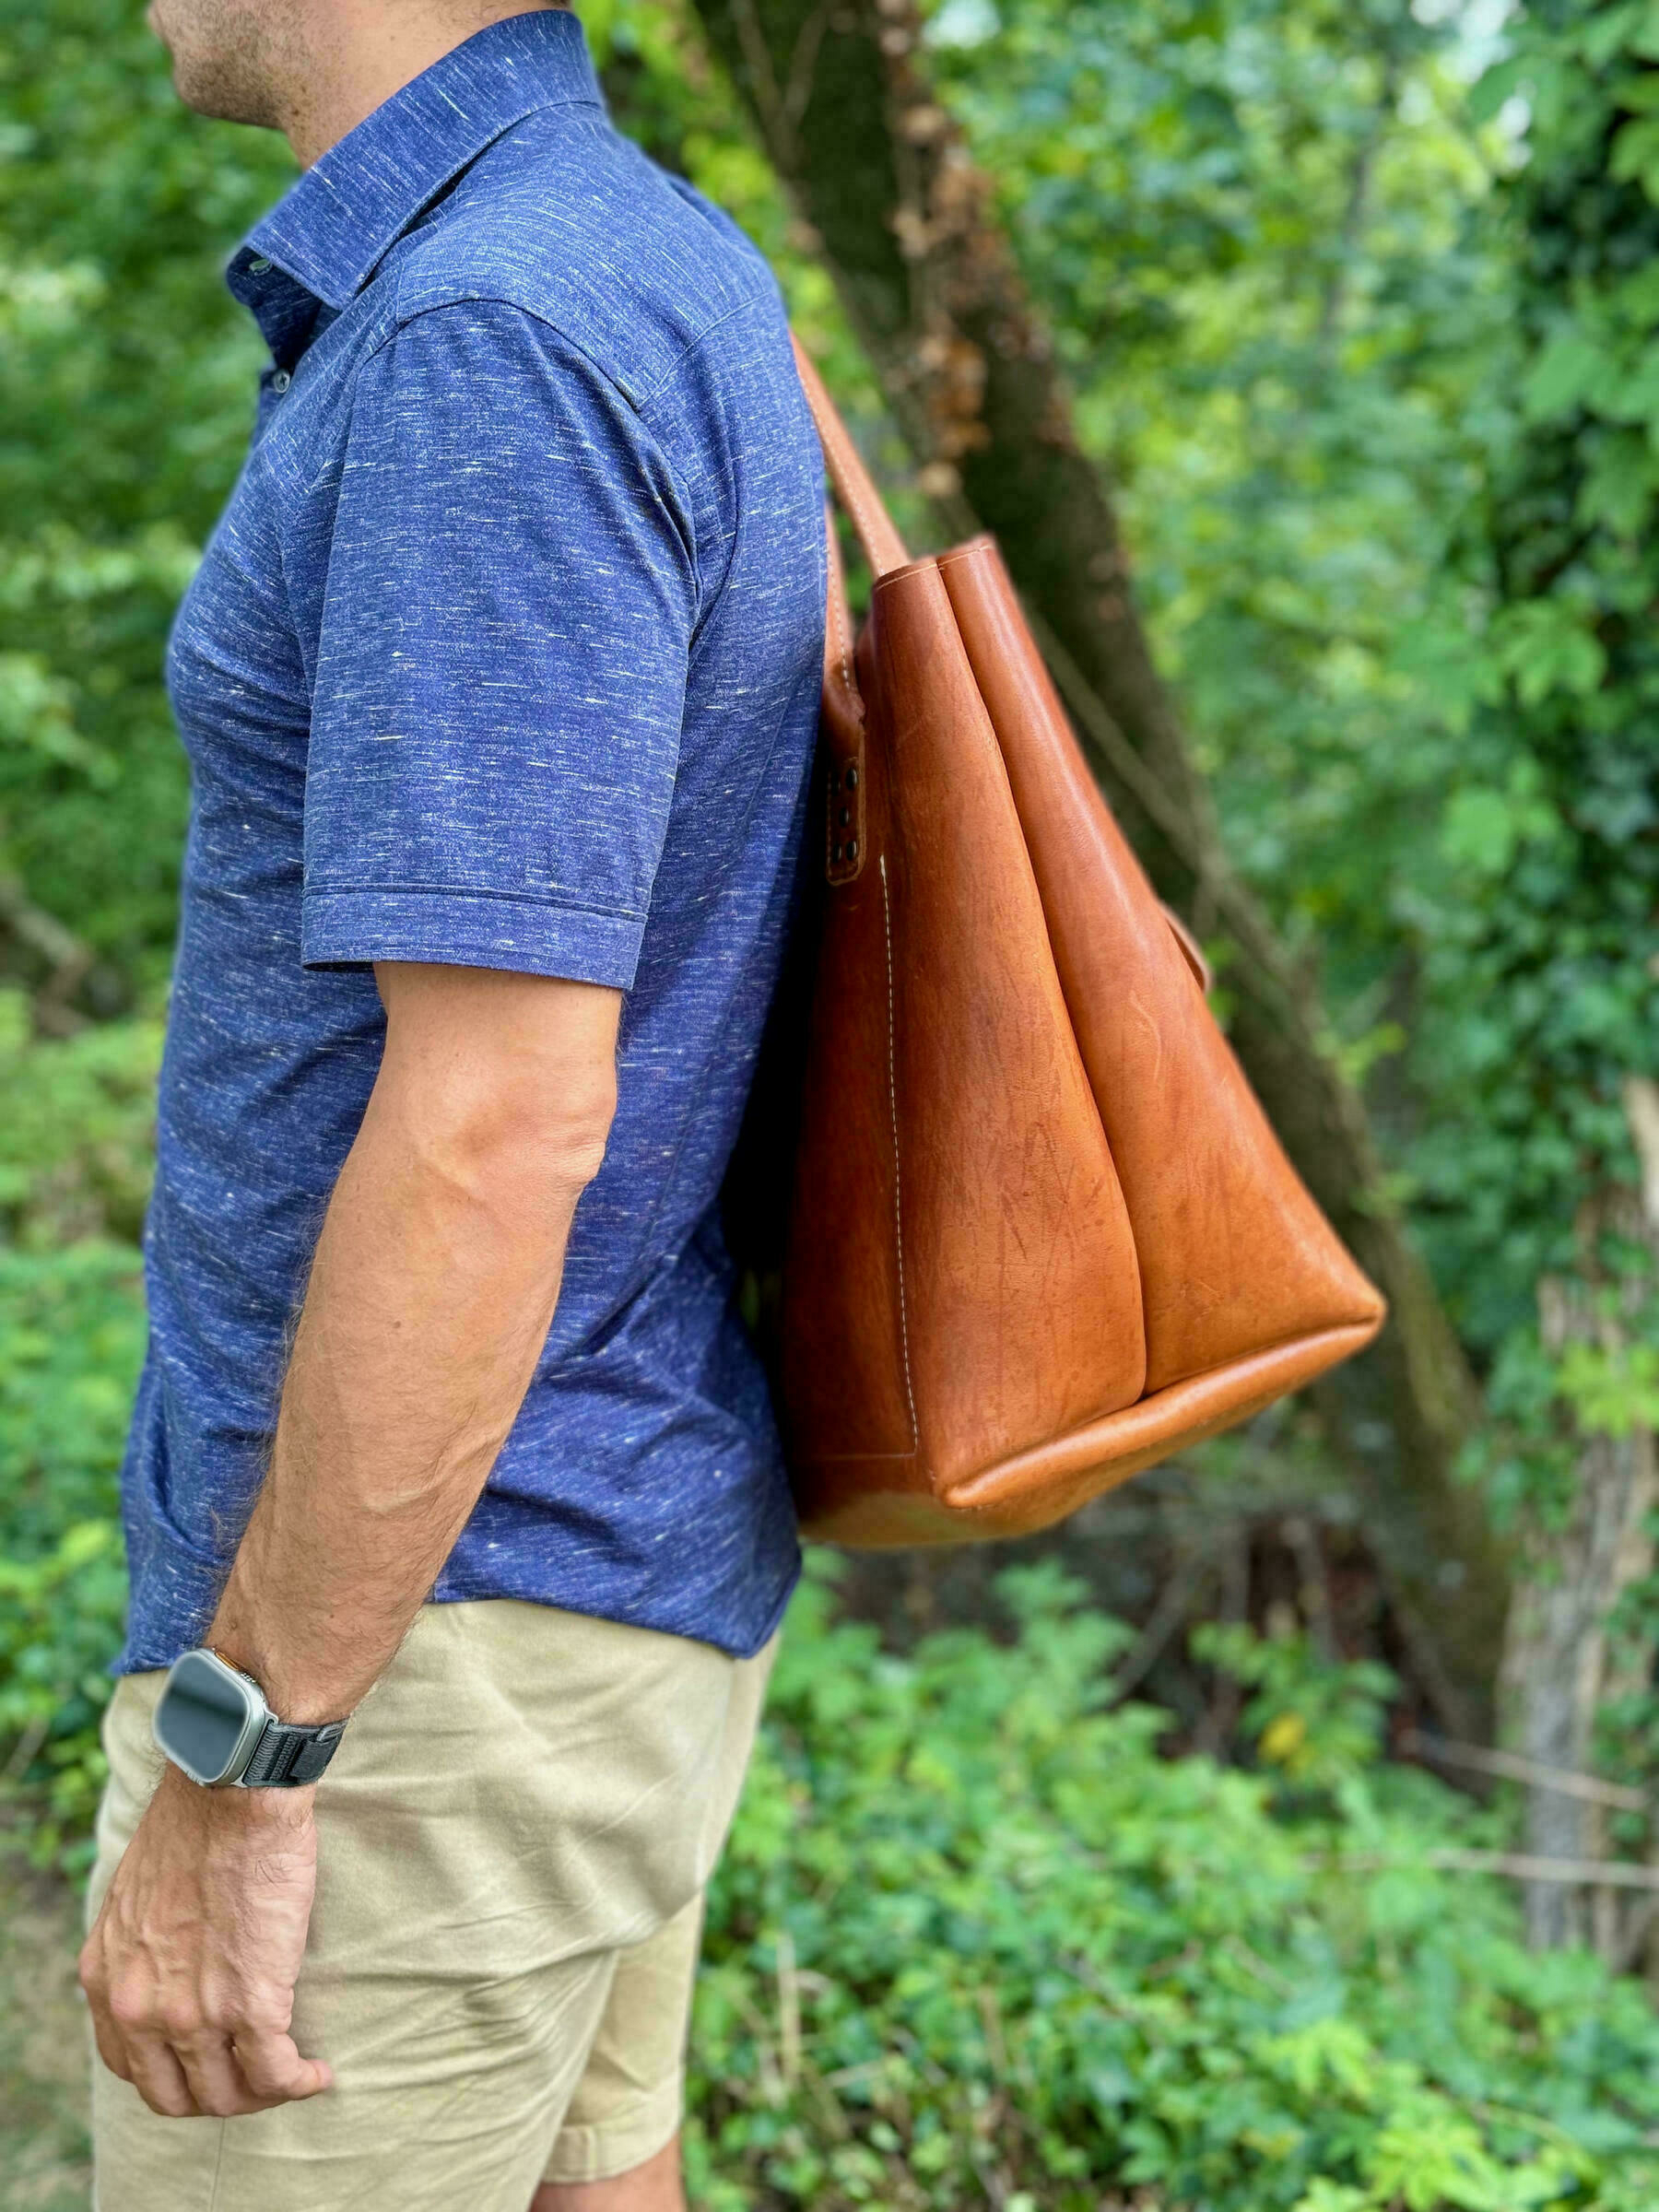 A person wearing a blue shirt and beige shorts is carrying a large brown leather bag over their shoulder while standing in a green outdoor setting.